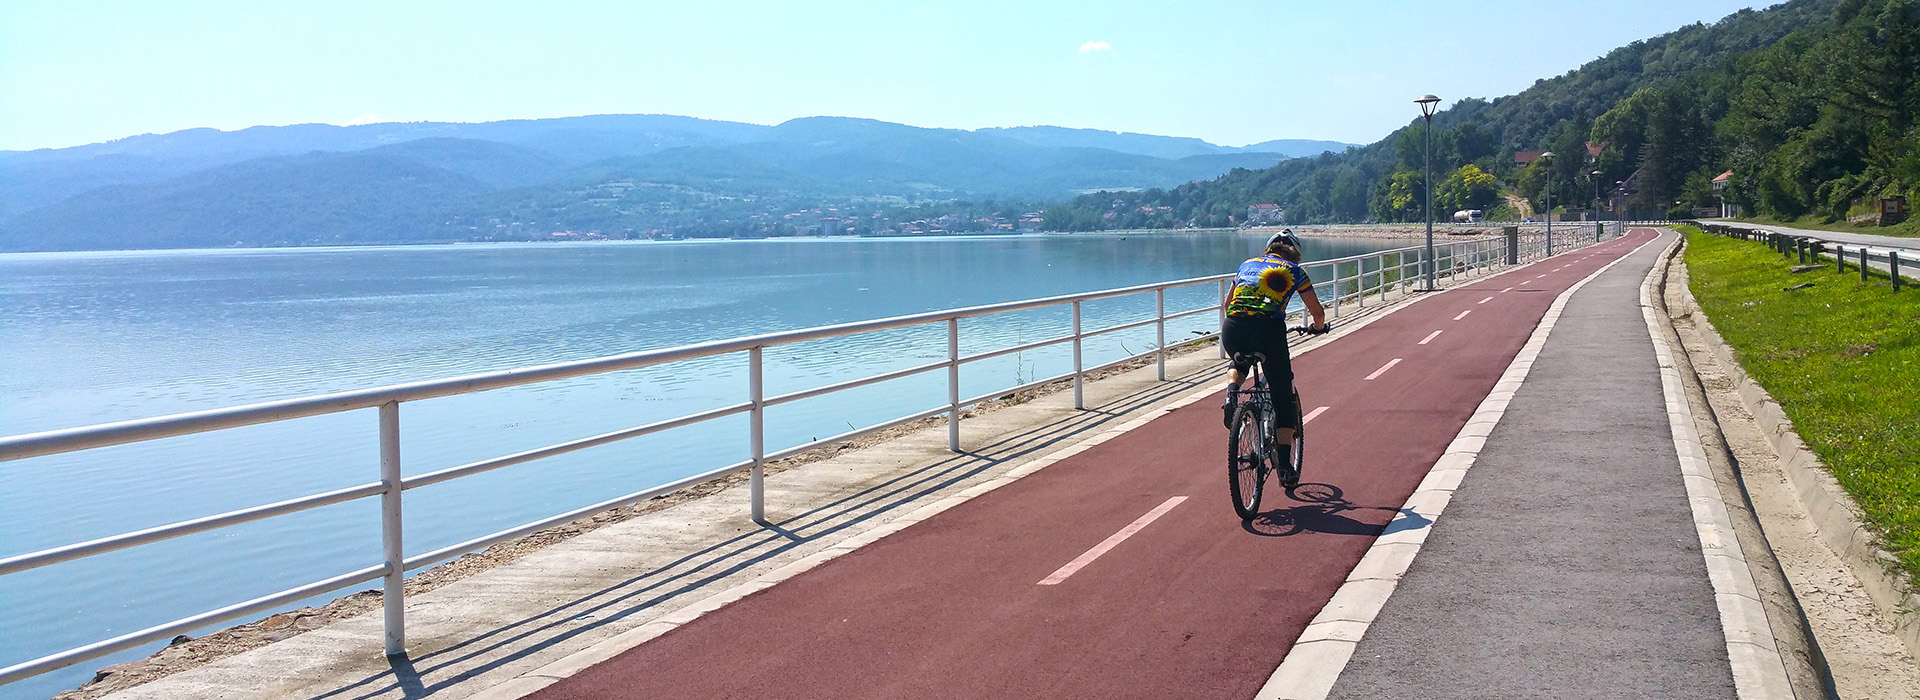 ACE Adventure Tours | Weekend cycling Danube